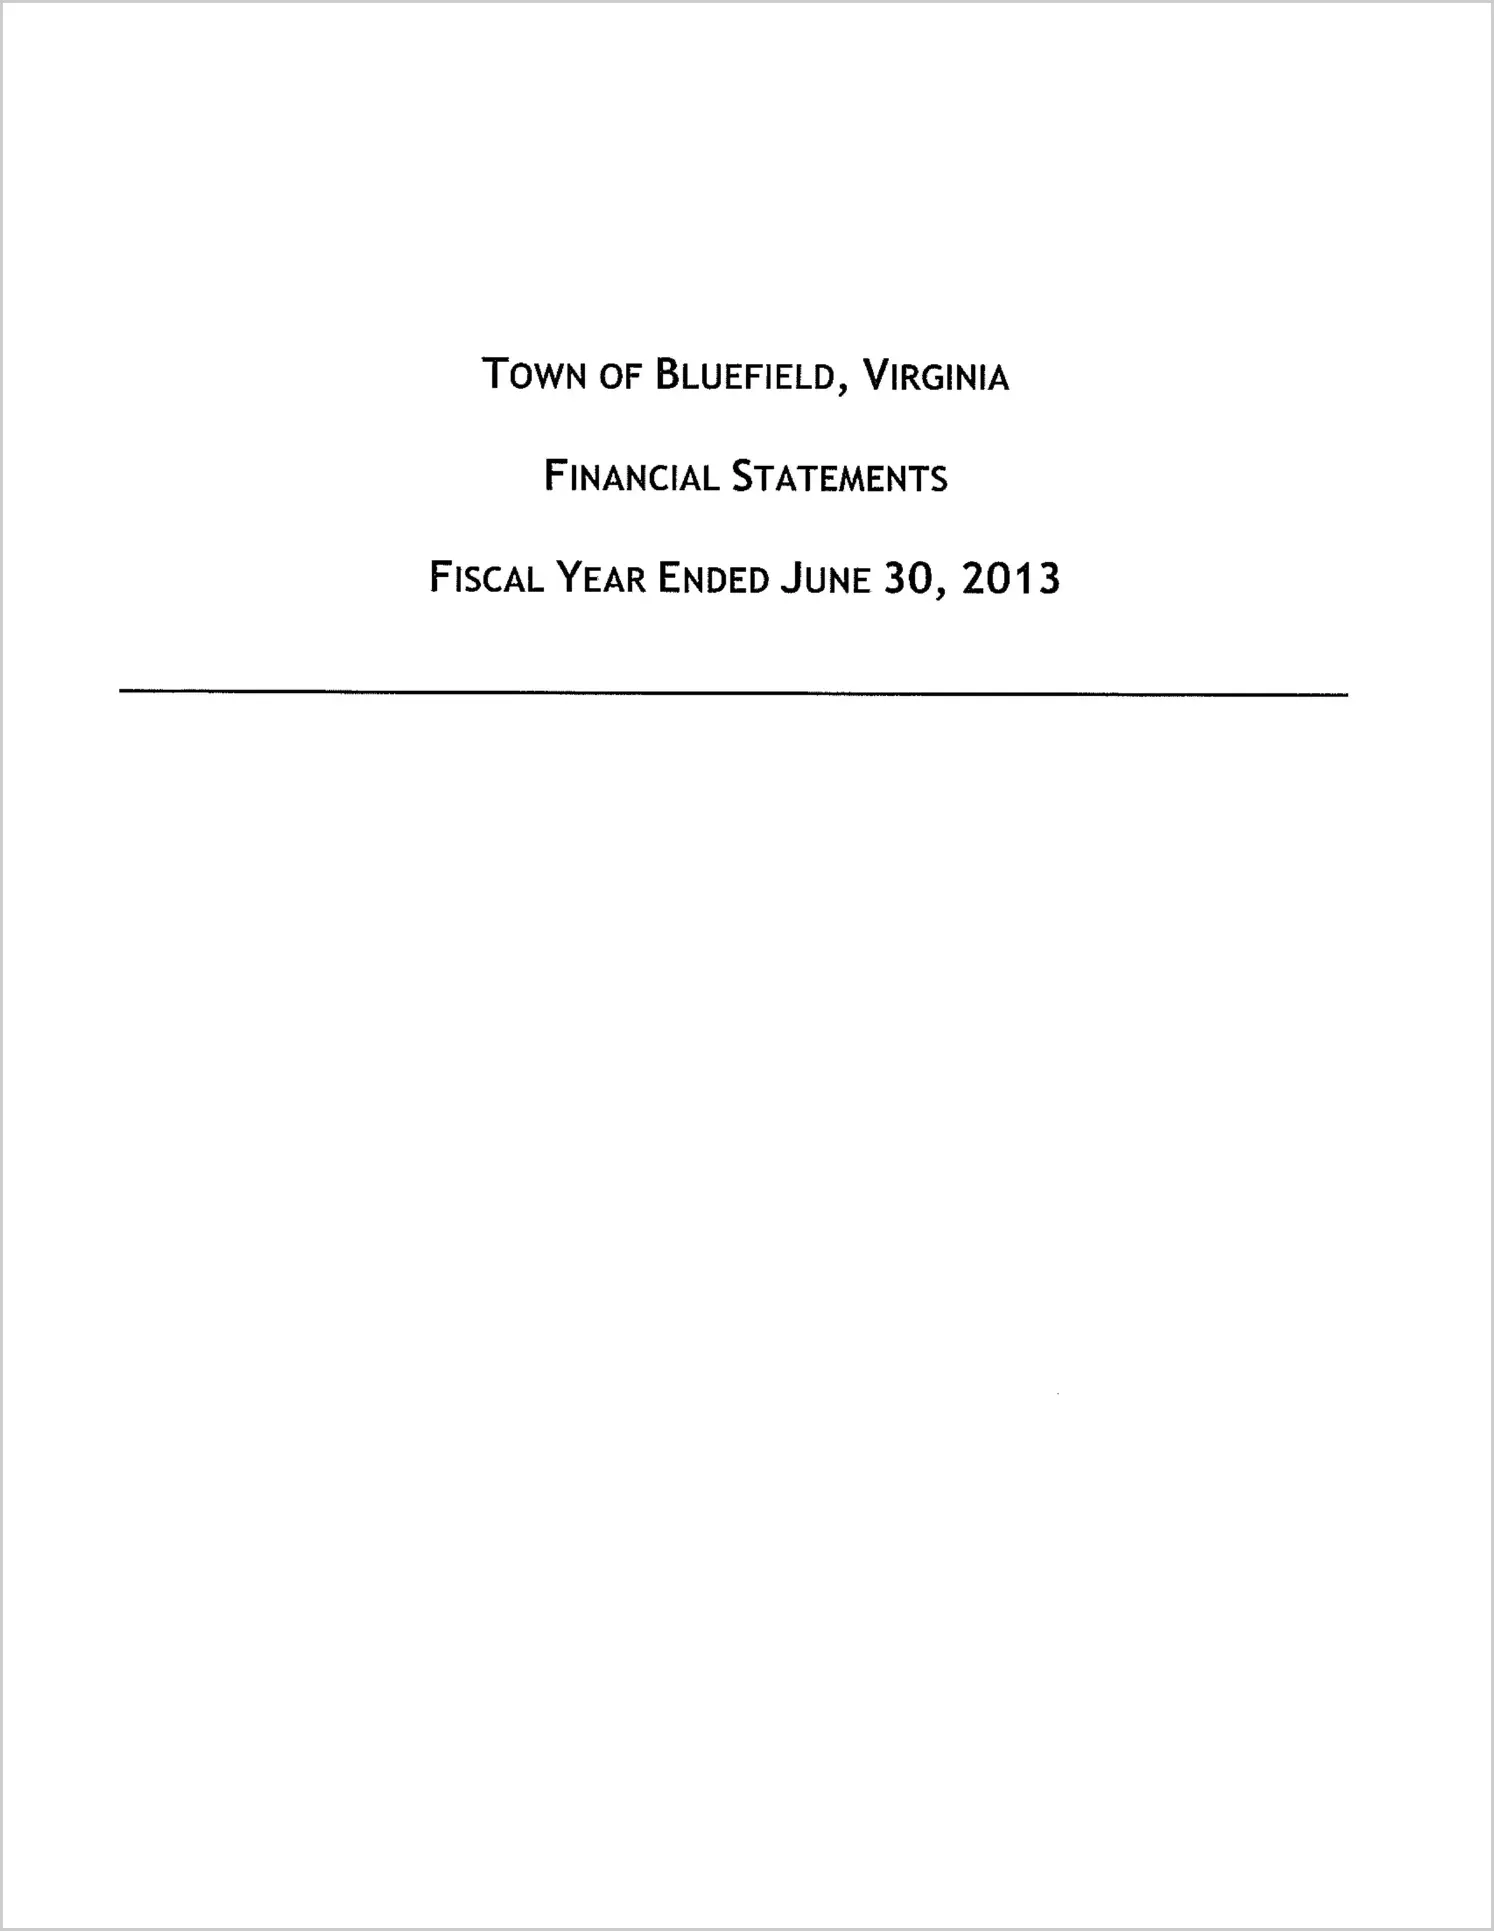 2013 Annual Financial Report for Town of Bluefield